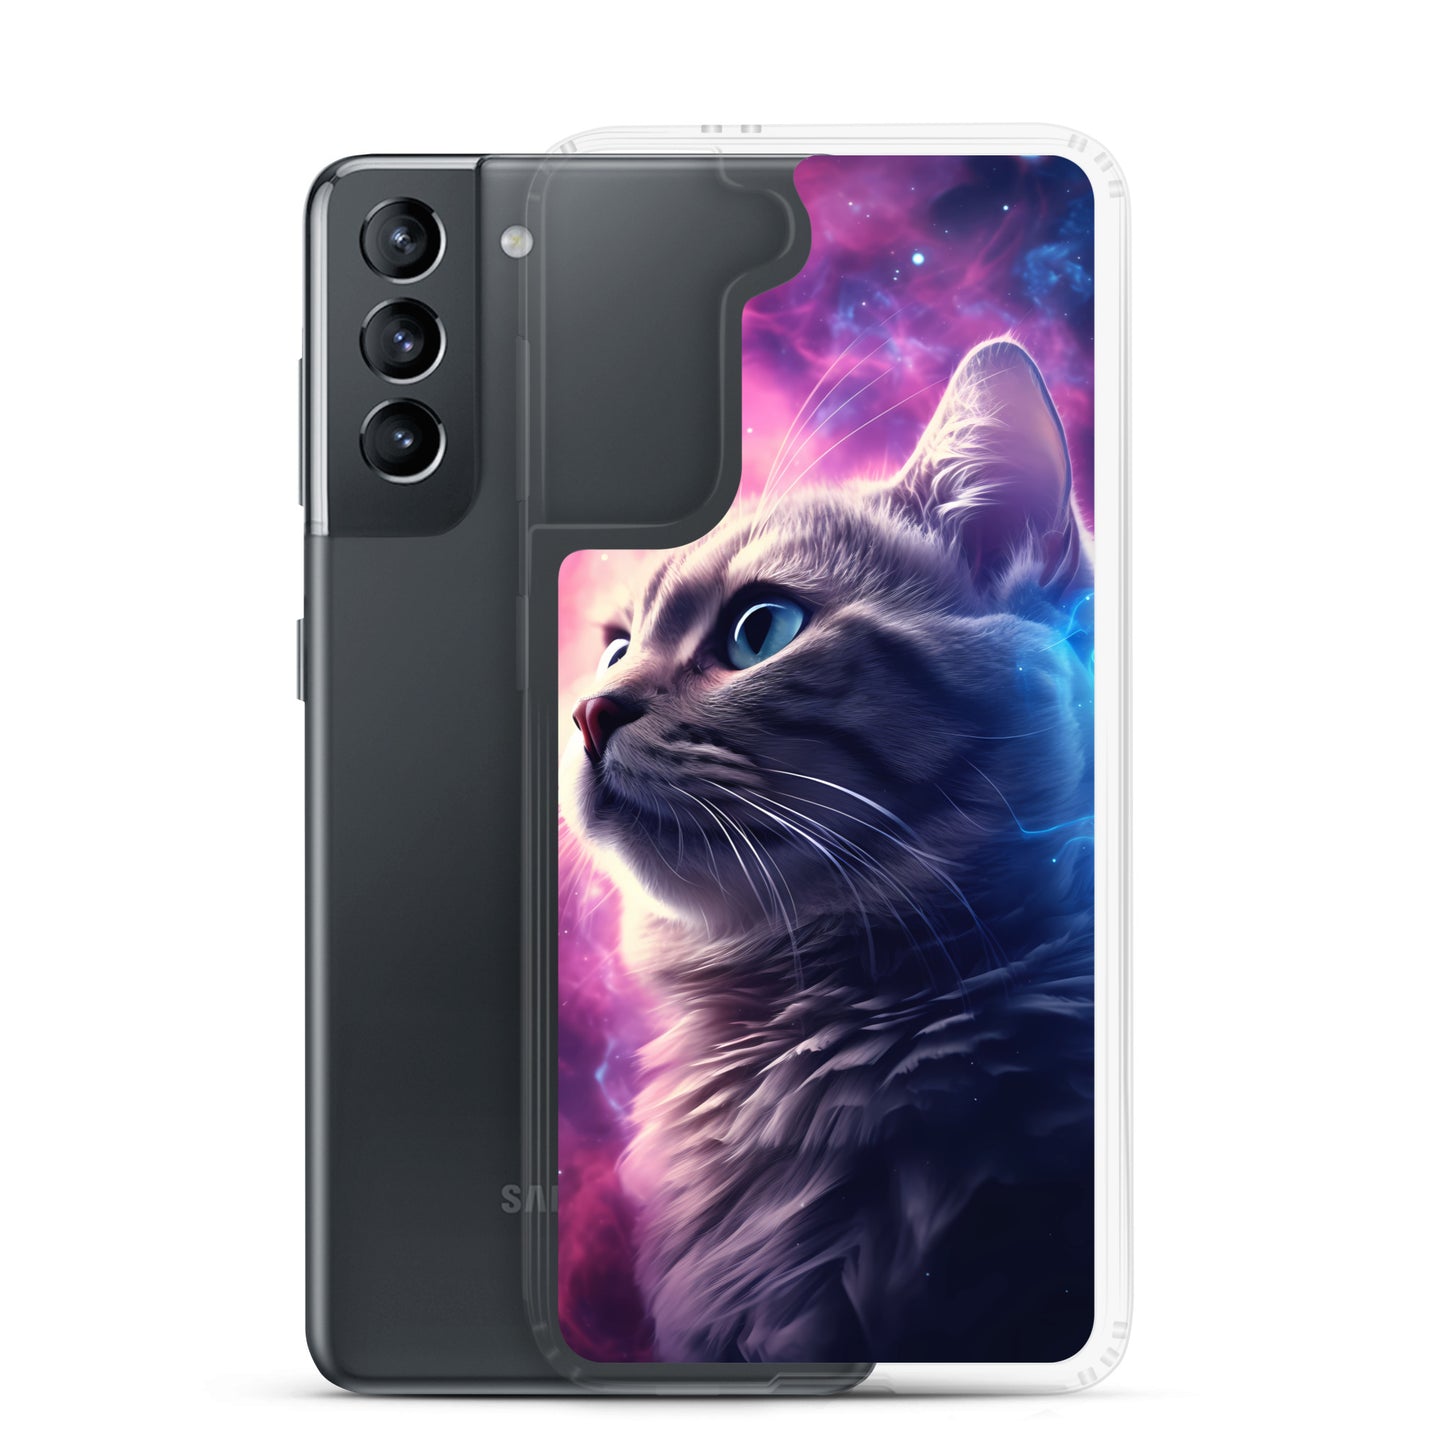 Samsung Case - Kitty in the Stars